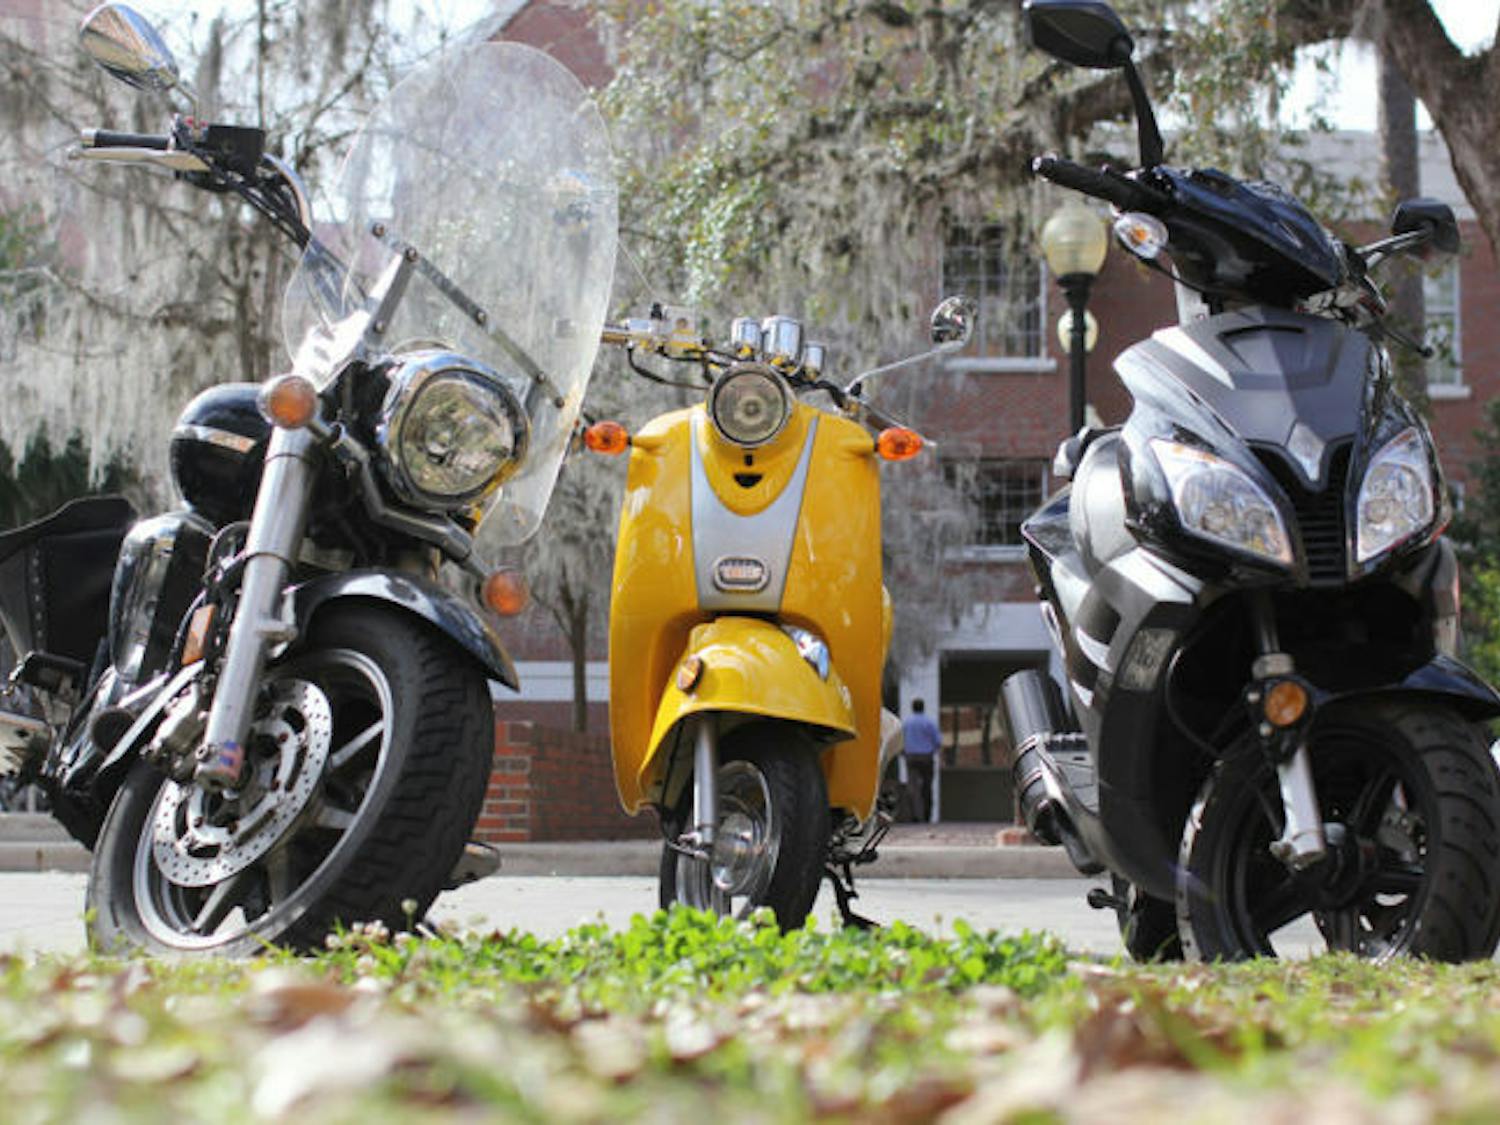 Since the 2009-2010 school year, the number of on-campus scooter decals bought dropped by about 4 percent, according to UF’s Transportation and Parking Services.